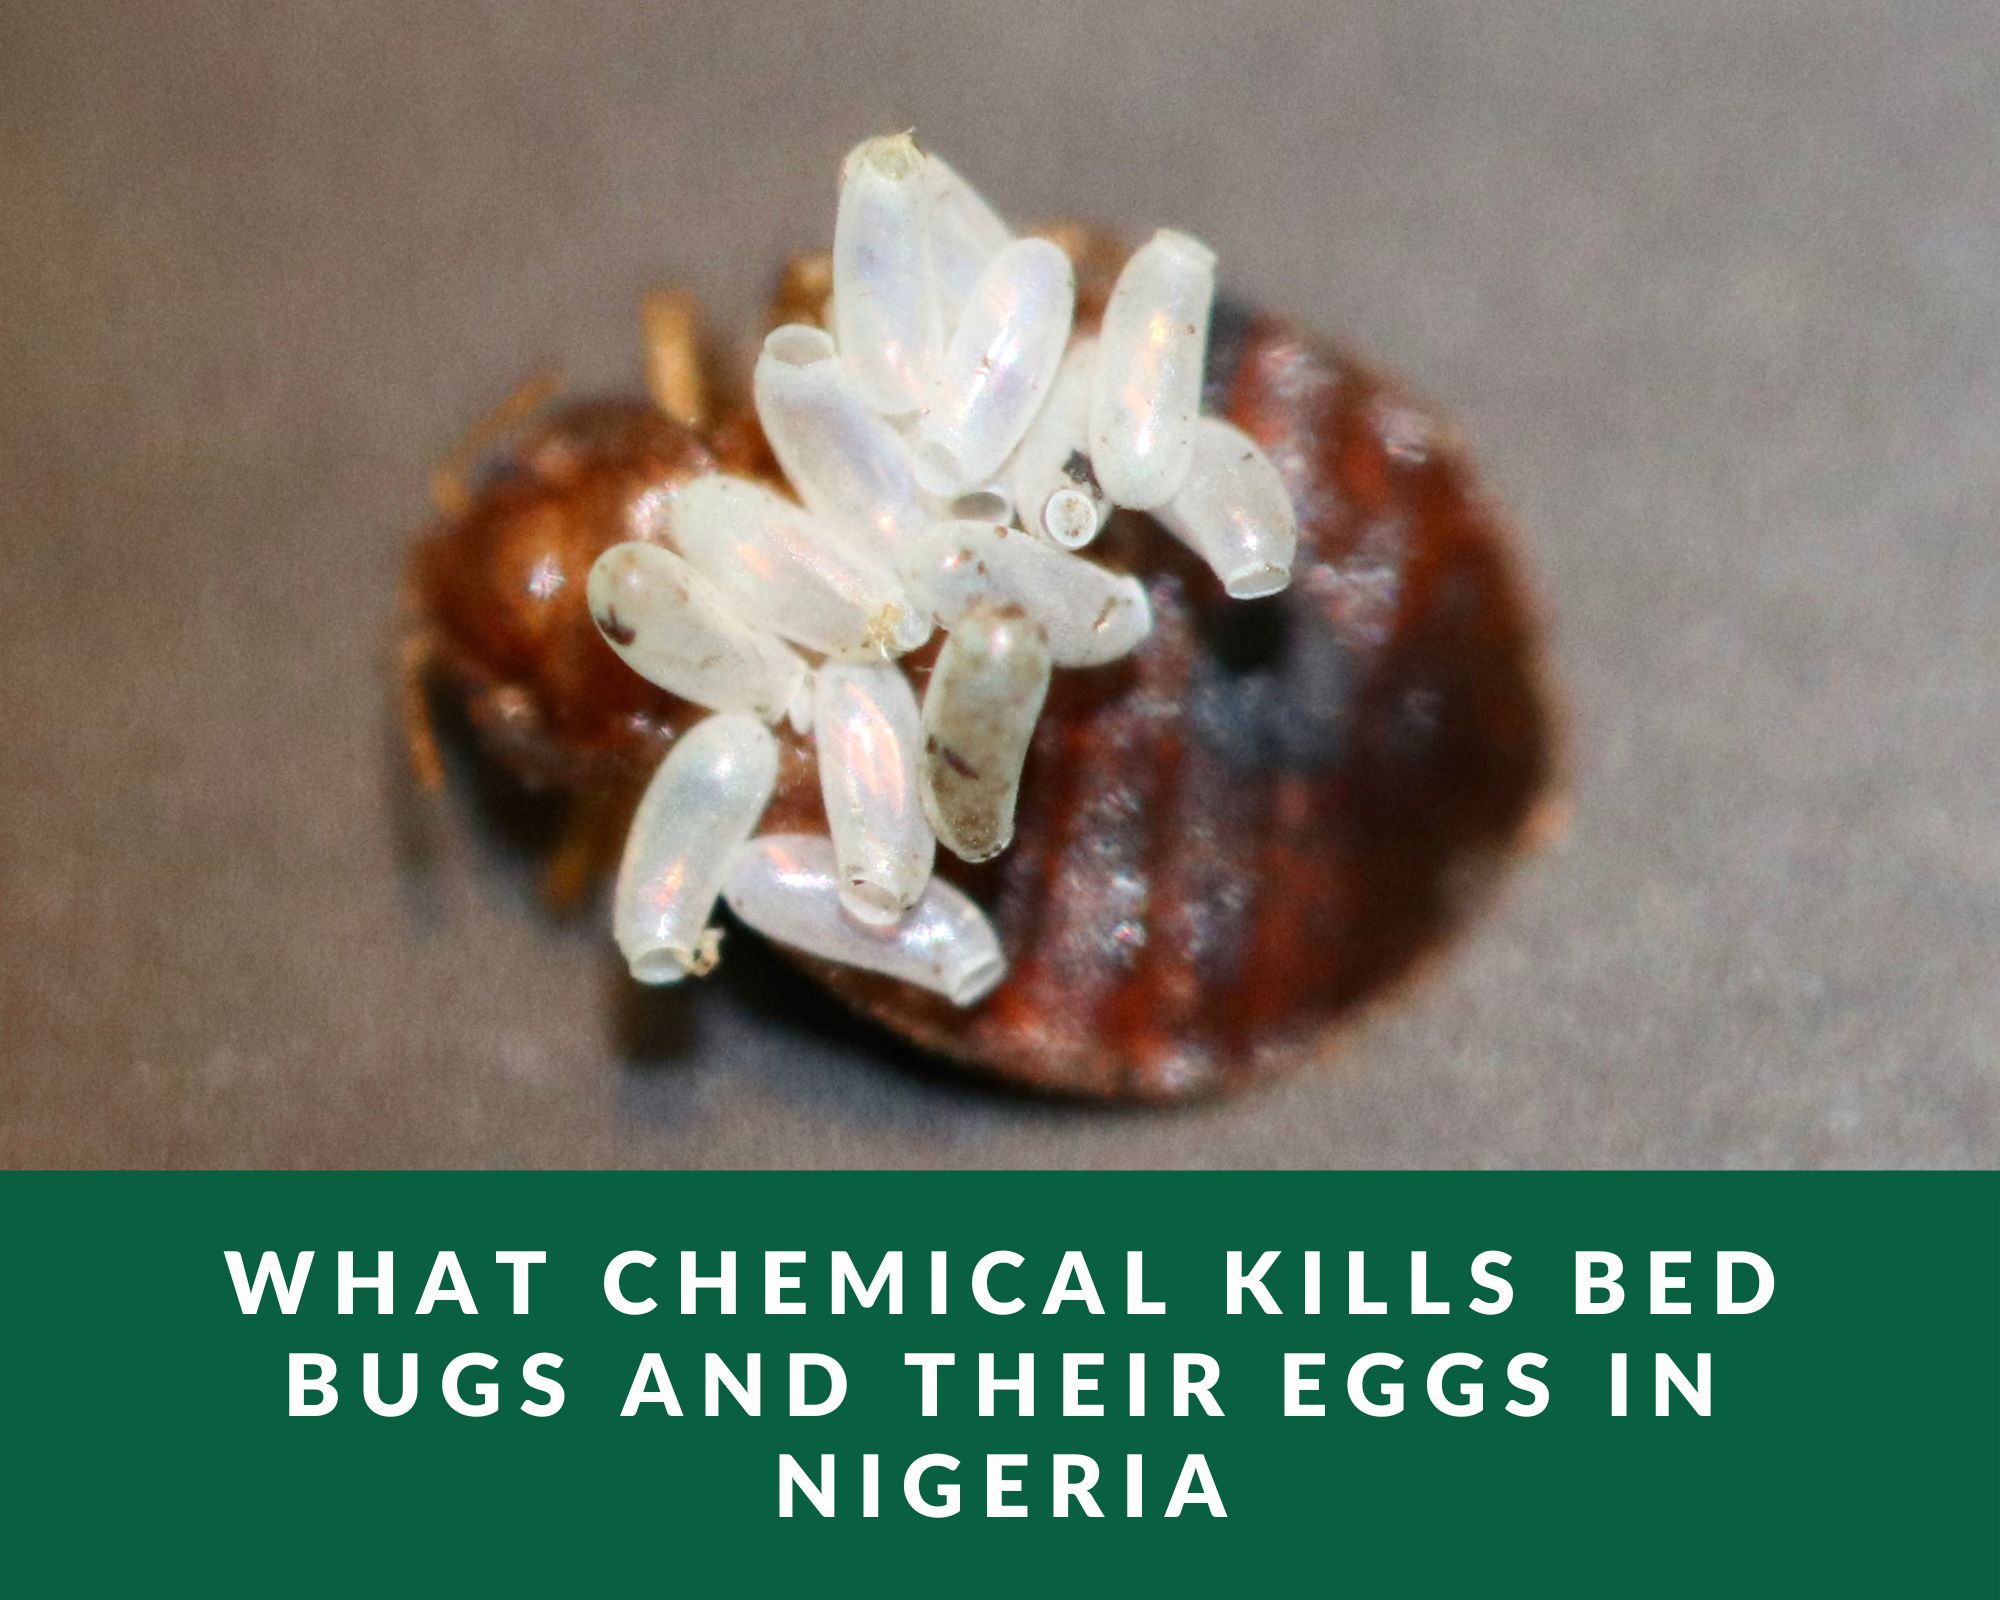 What chemical kills bed bugs and their eggs in nigeria